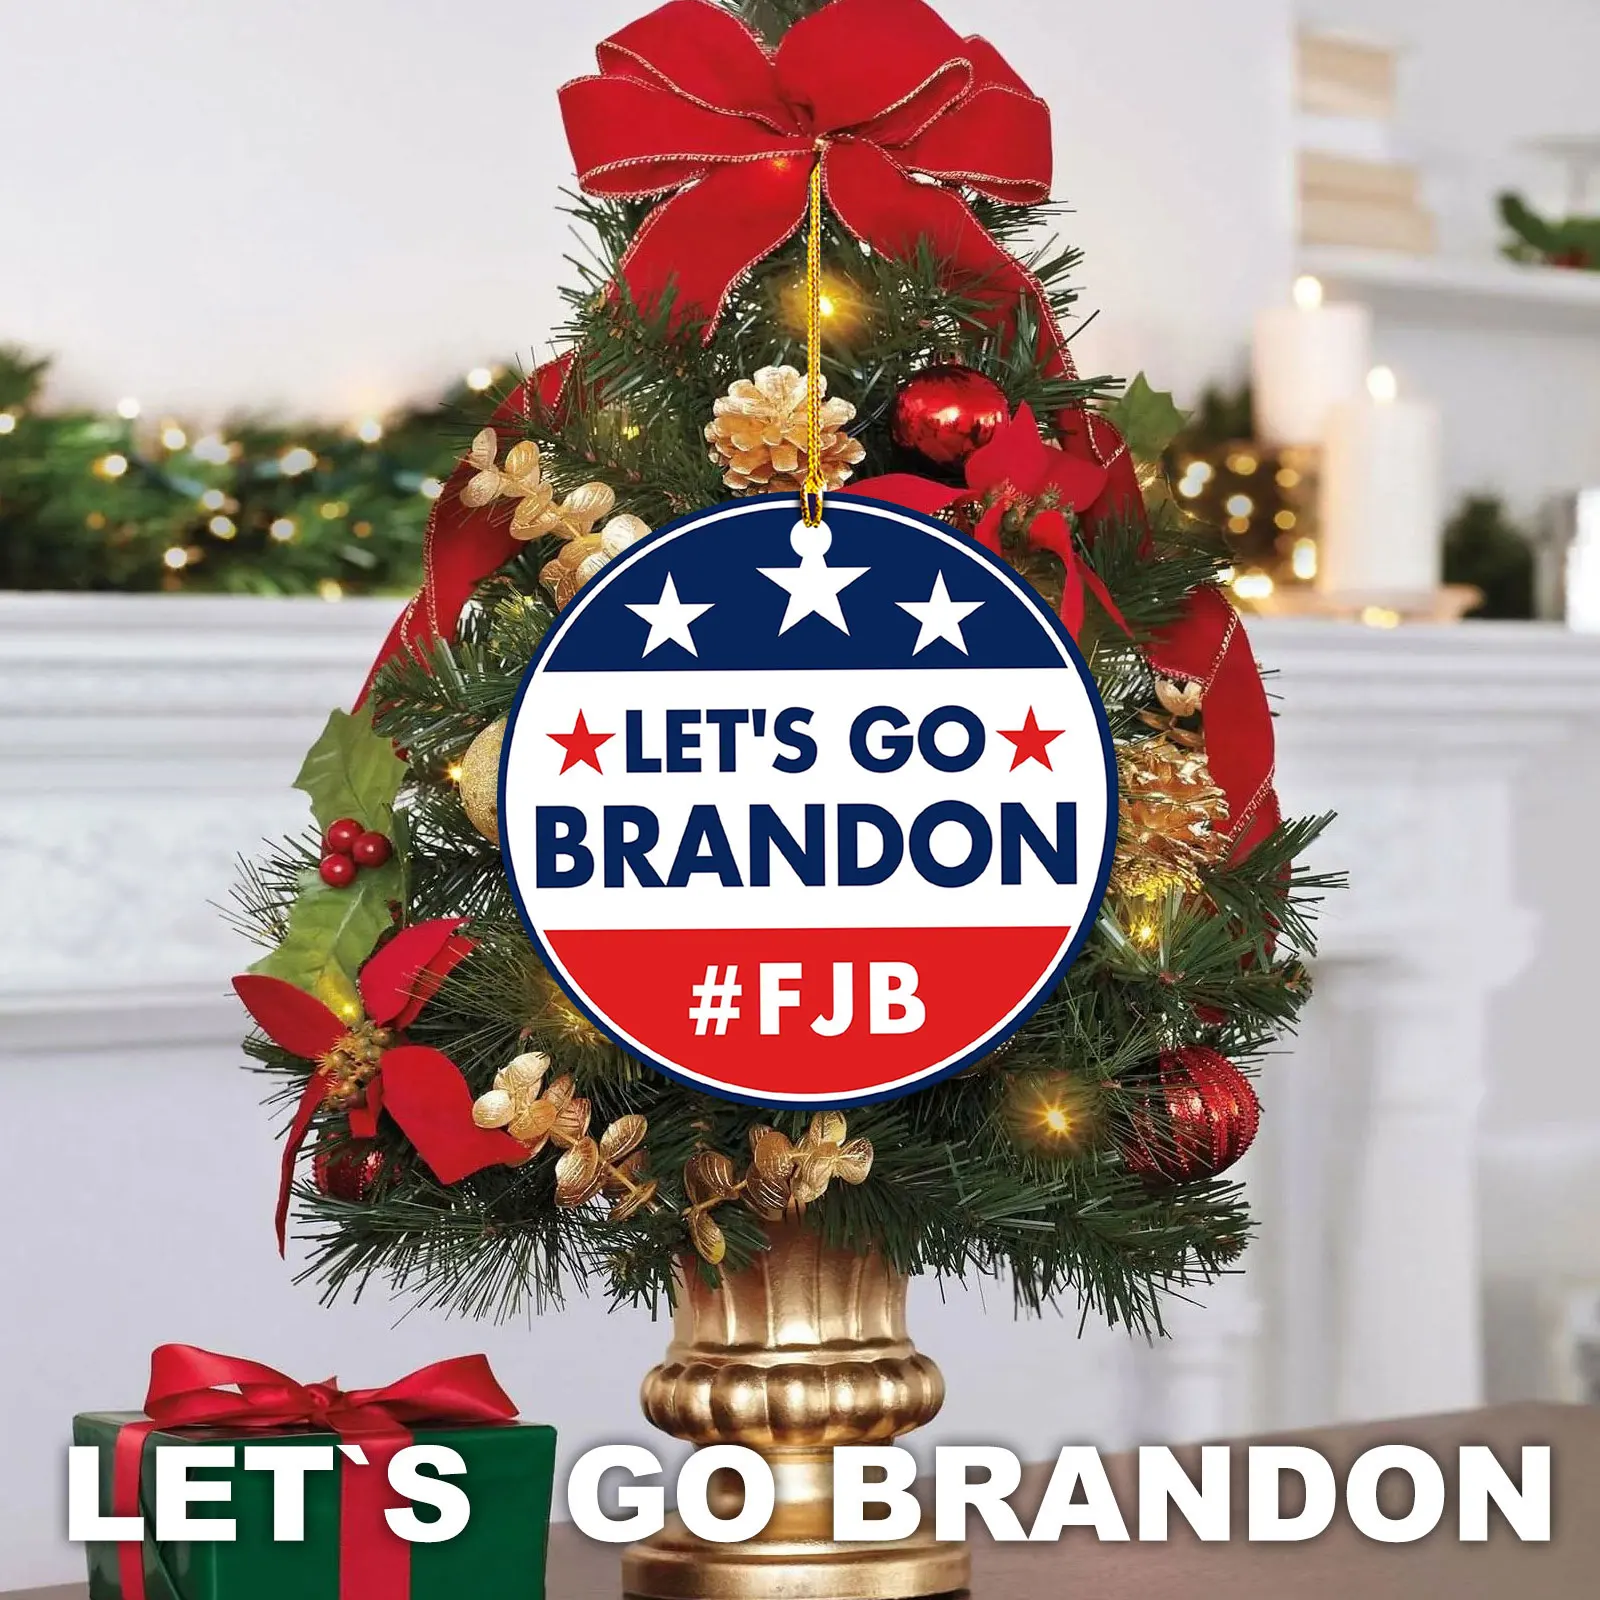 

Hanging Ornament Lets Go Brandon, President Lets Go Brandon FJB Round Hangings Pendants Ornaments for Christmas Tree Decorations